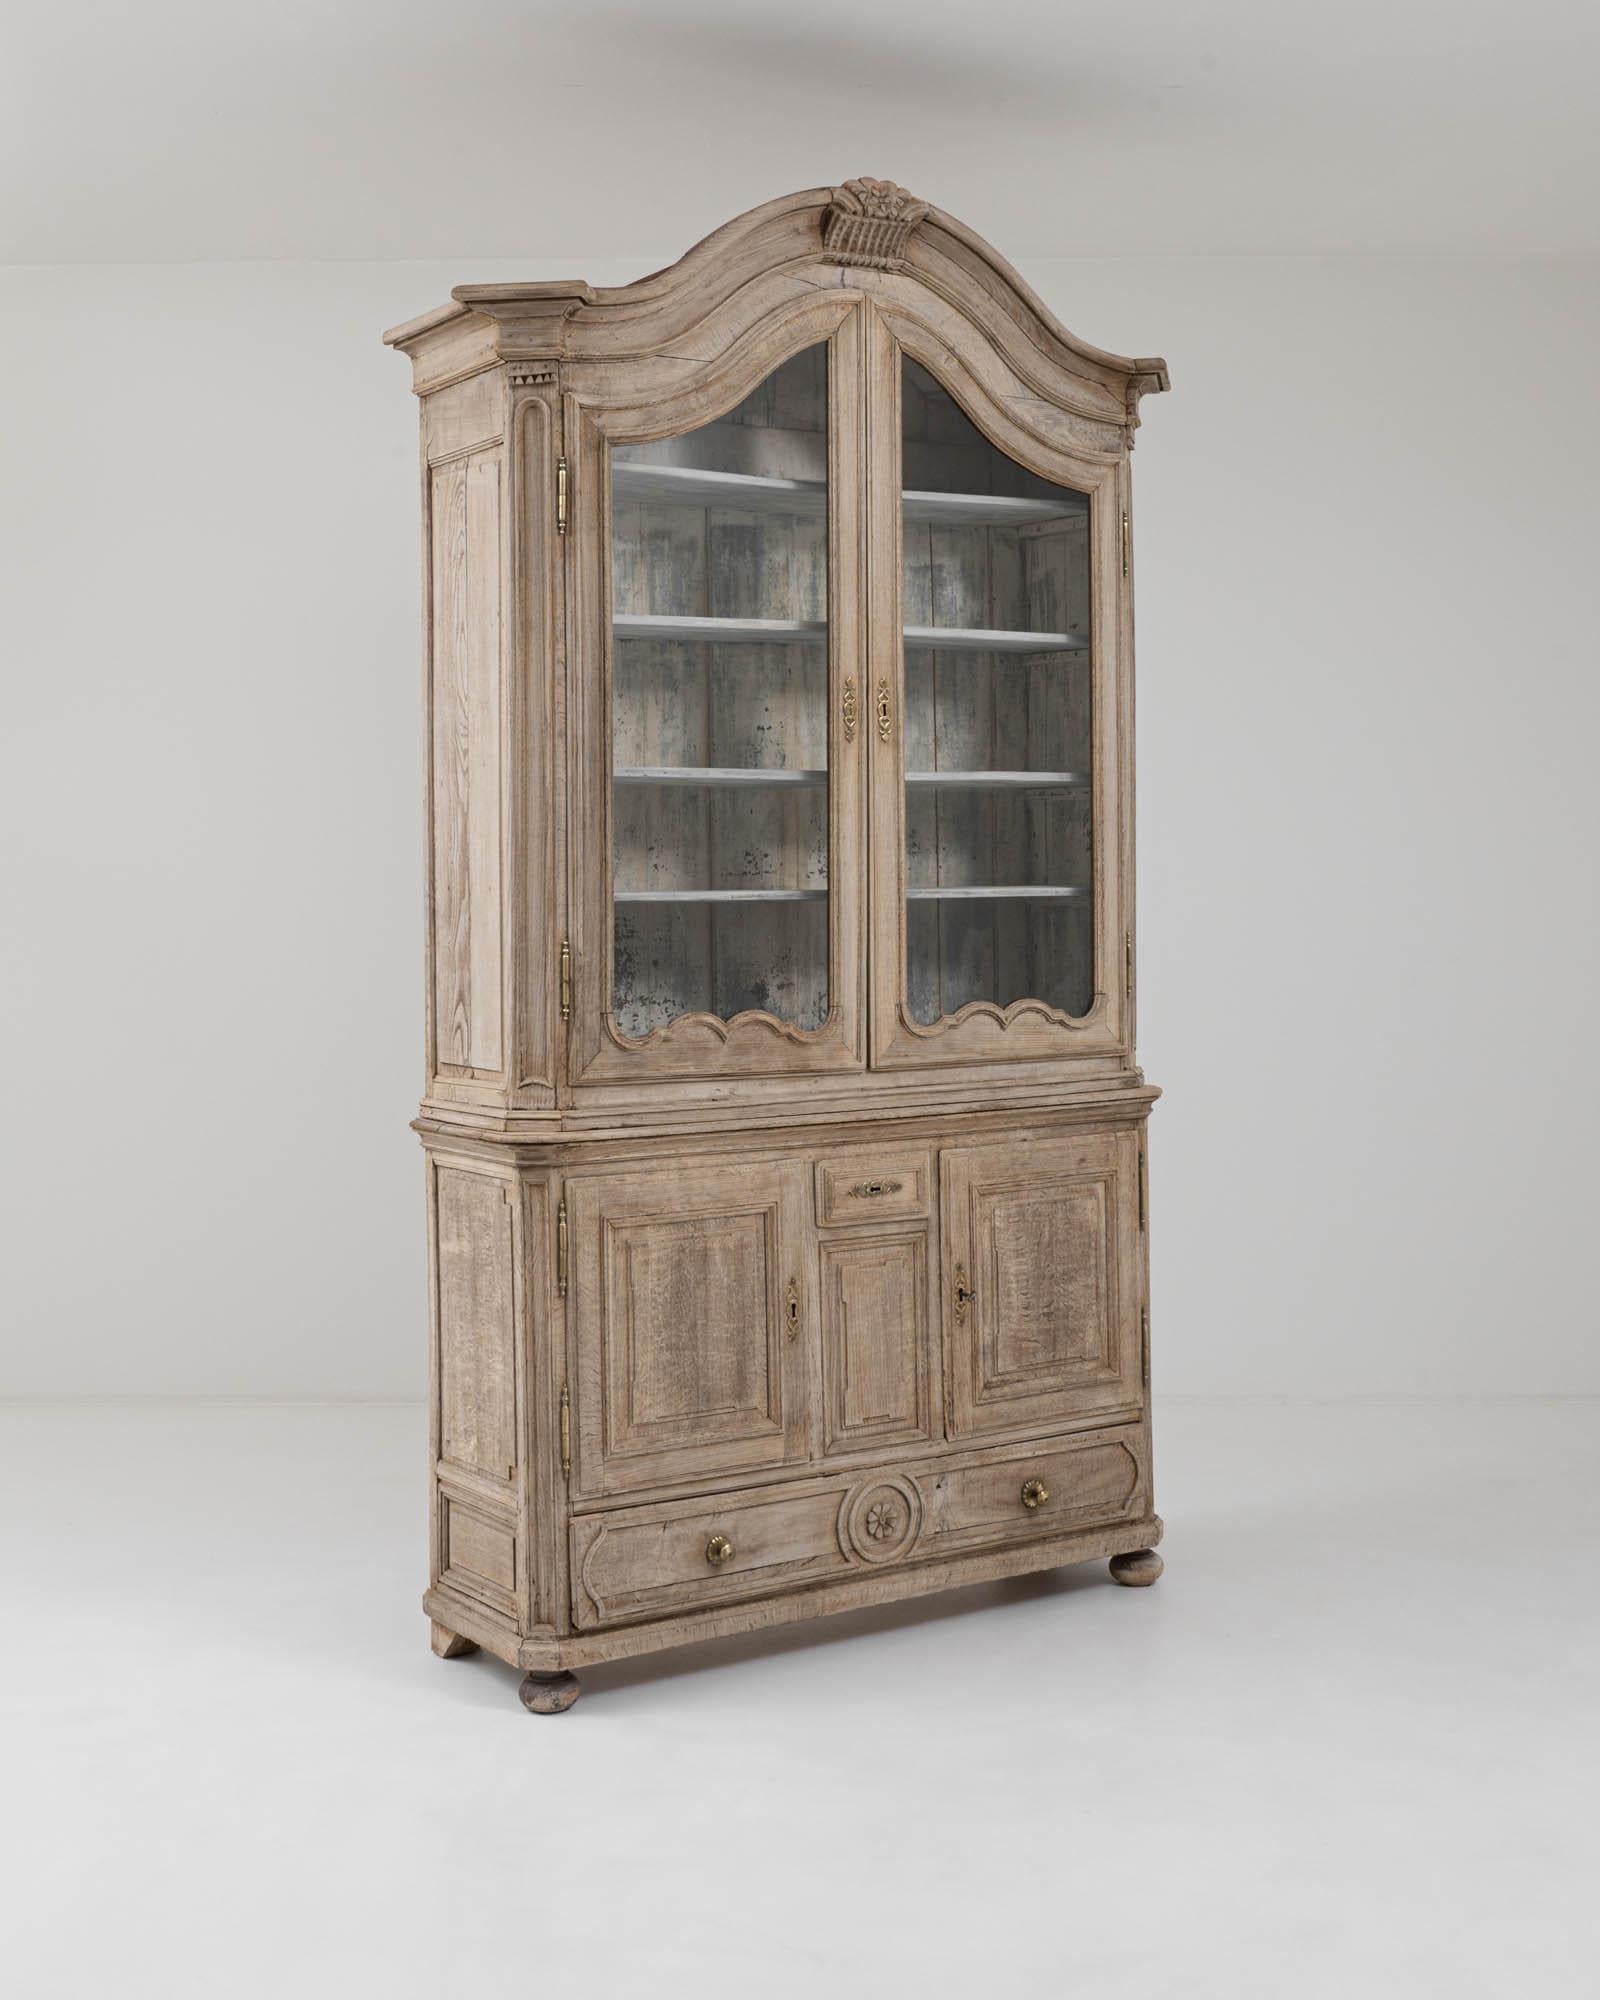 A wooden vitrine created in 19th century France. Standing with a classical poise, this vitrine towers overhead, beckoning one toward it with its French Provincial elegance. Emphatically carved floral and scroll motifs and handsome brass hardware